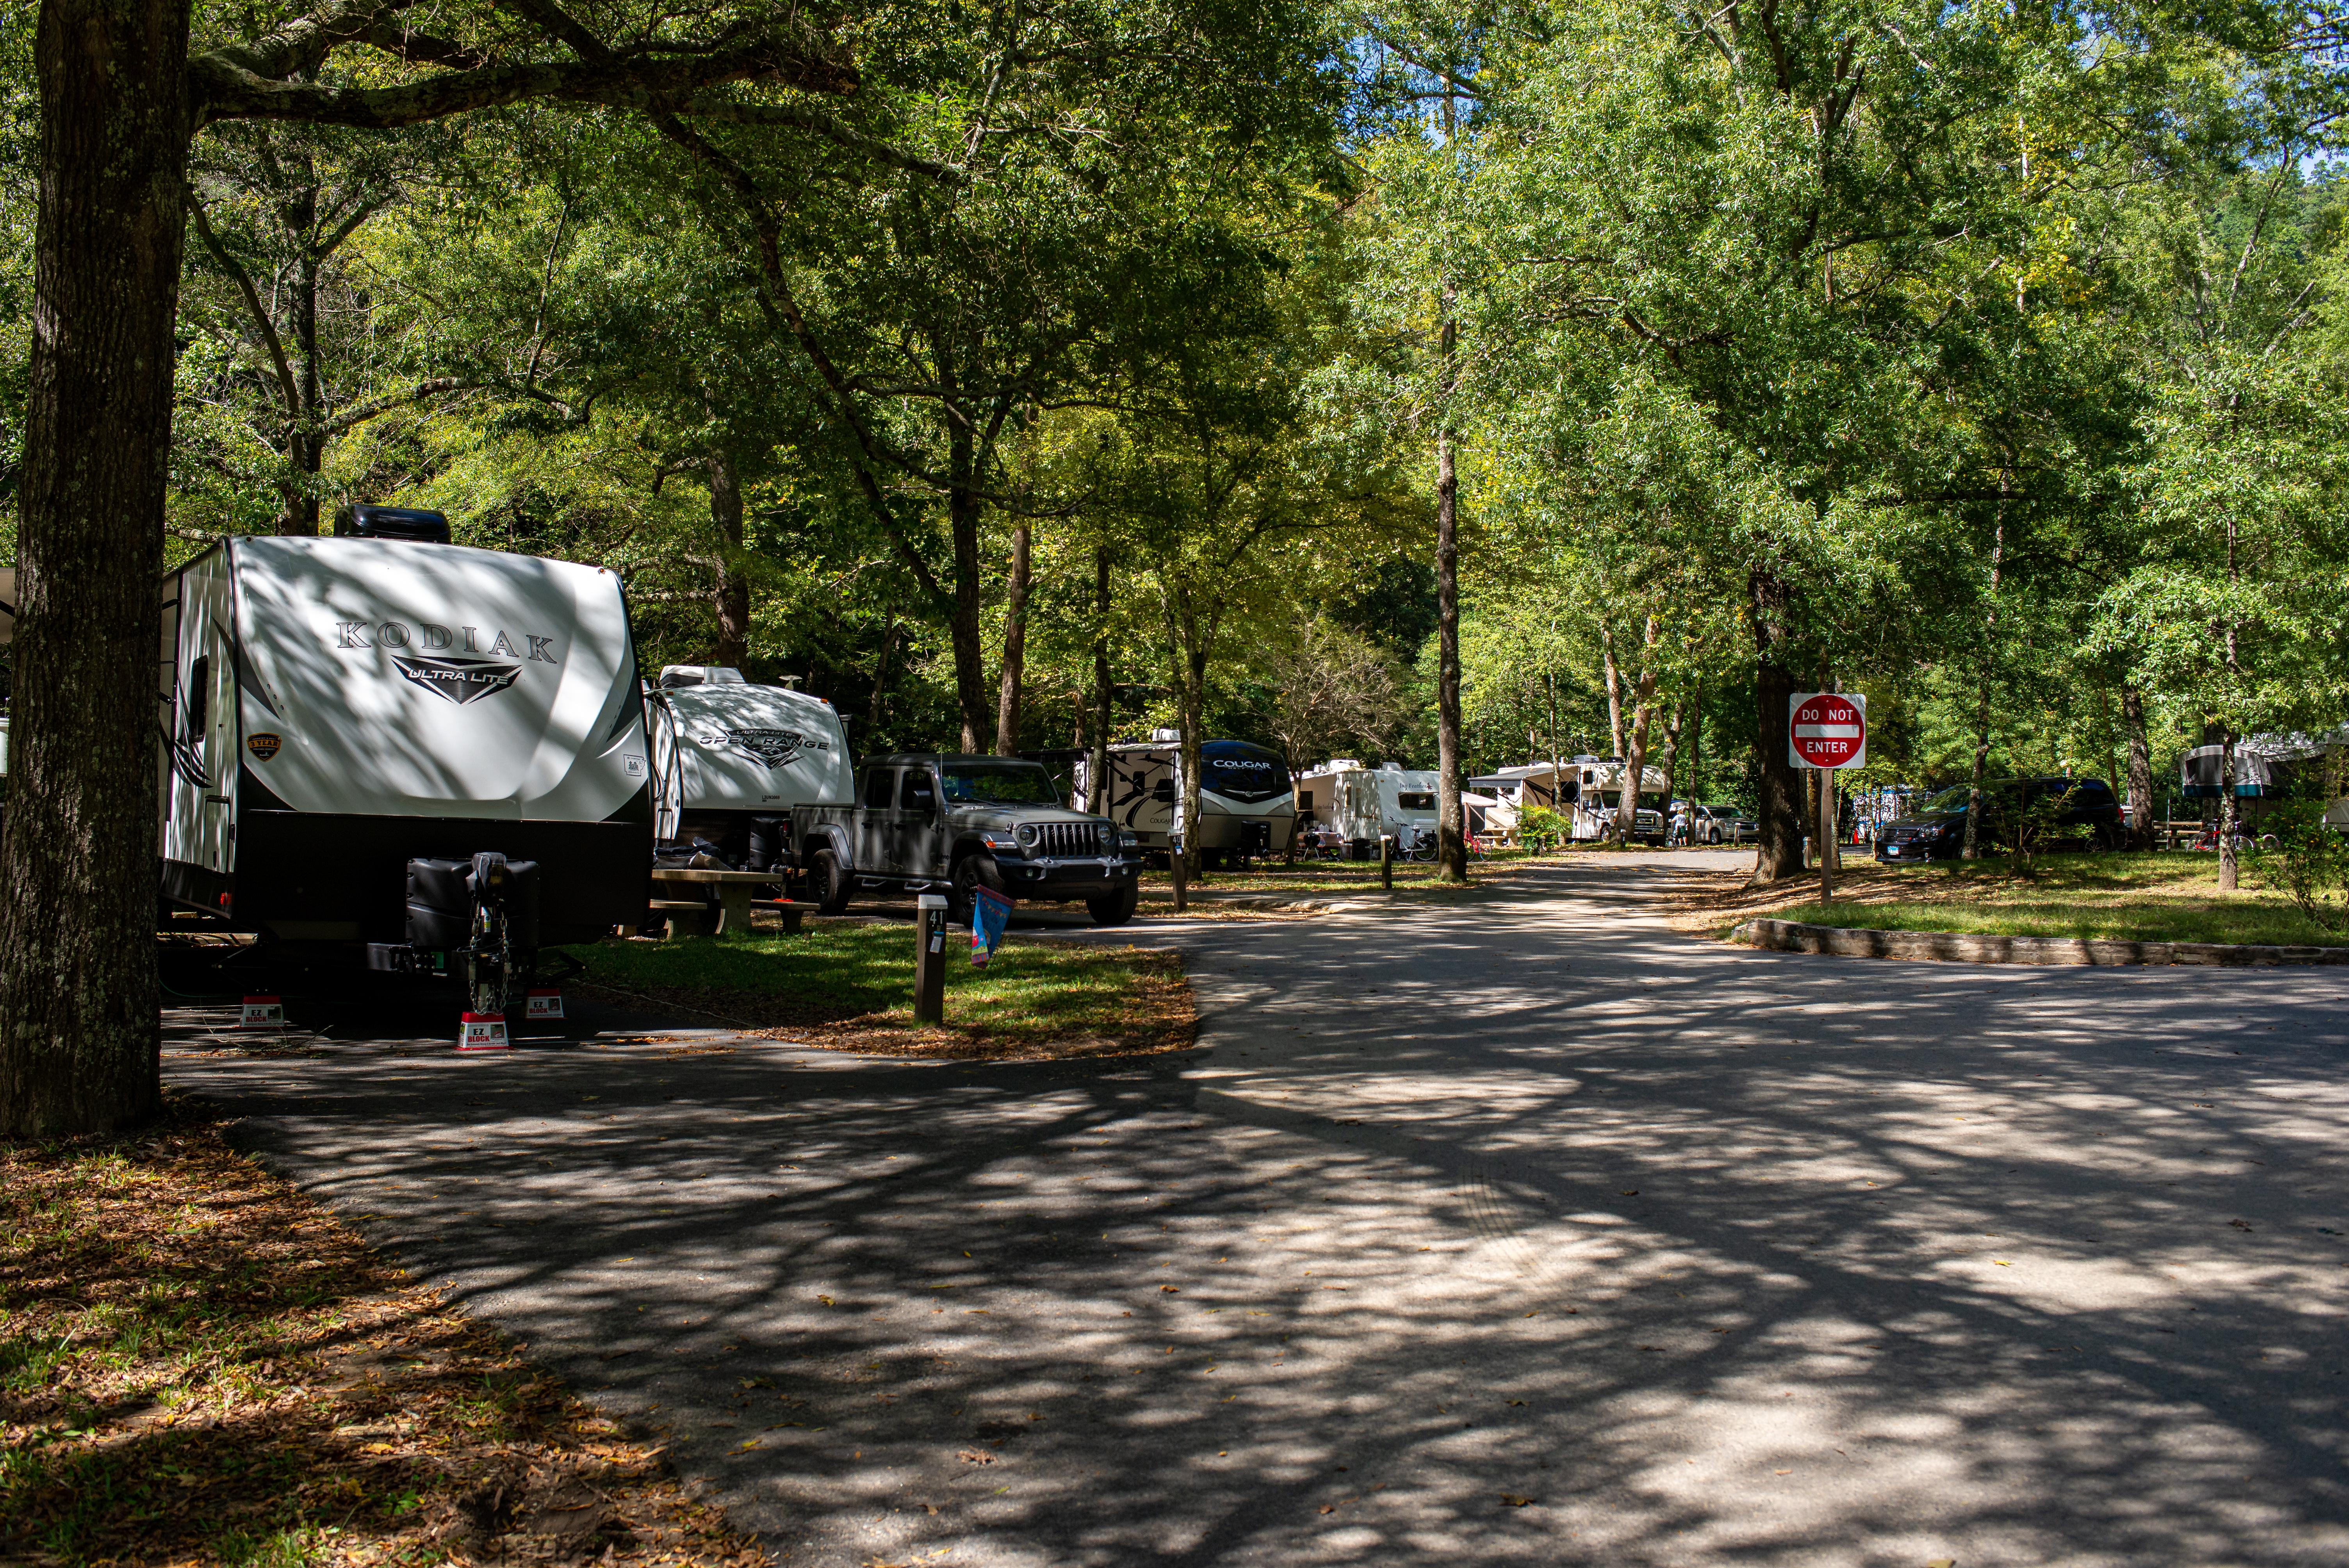 RV's lined up on the campground